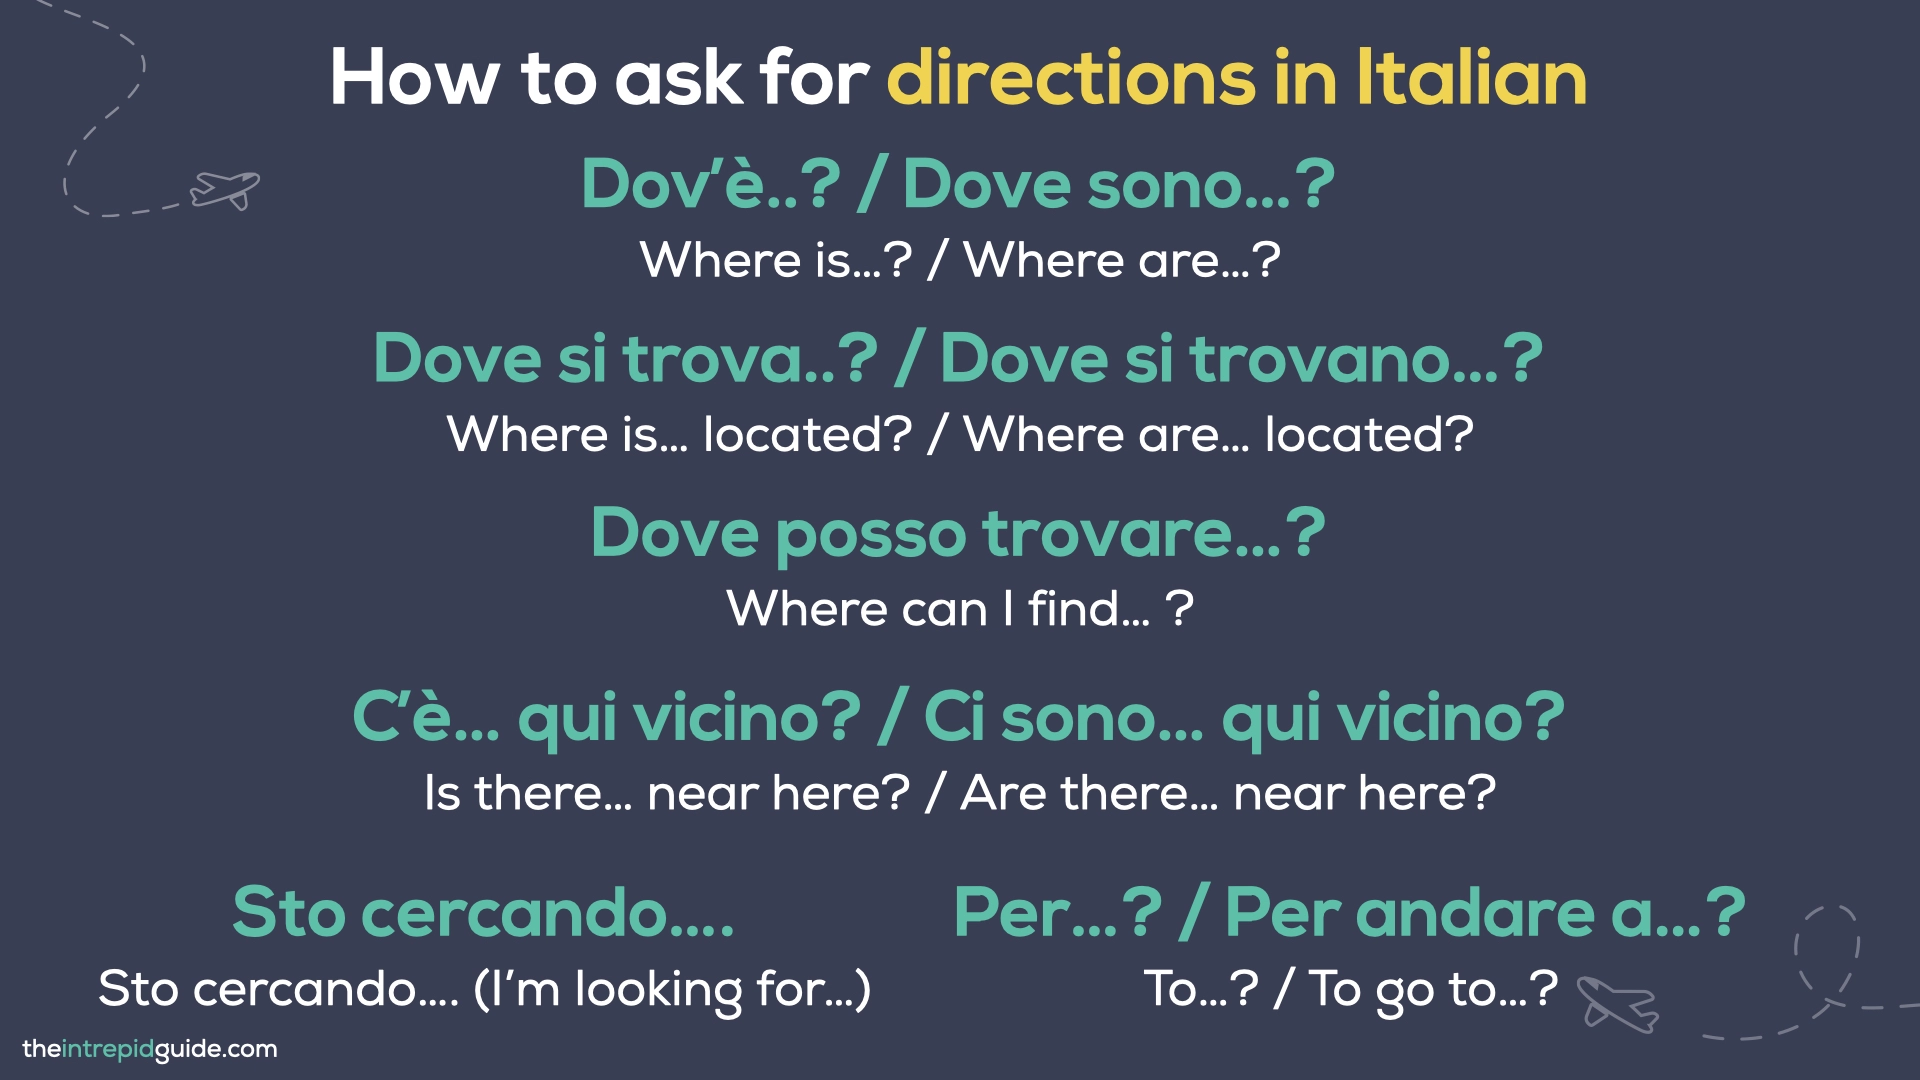 Directions in Italian - How to ask where something is in Italian